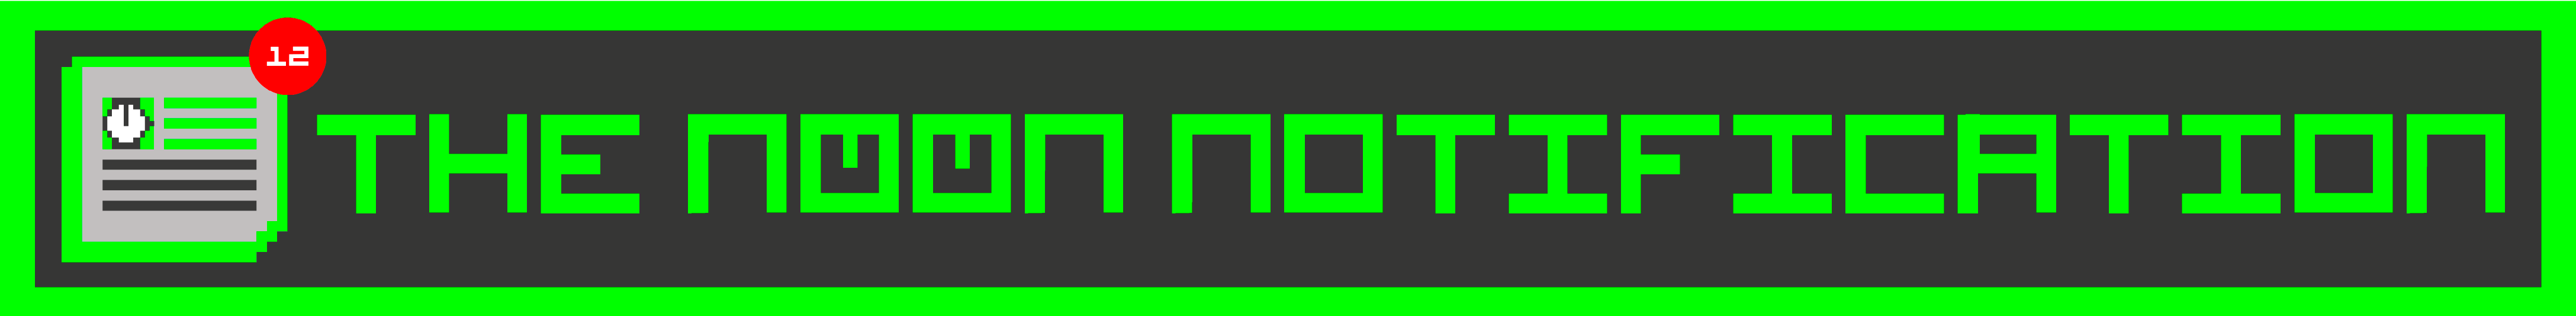 The Noonification banner